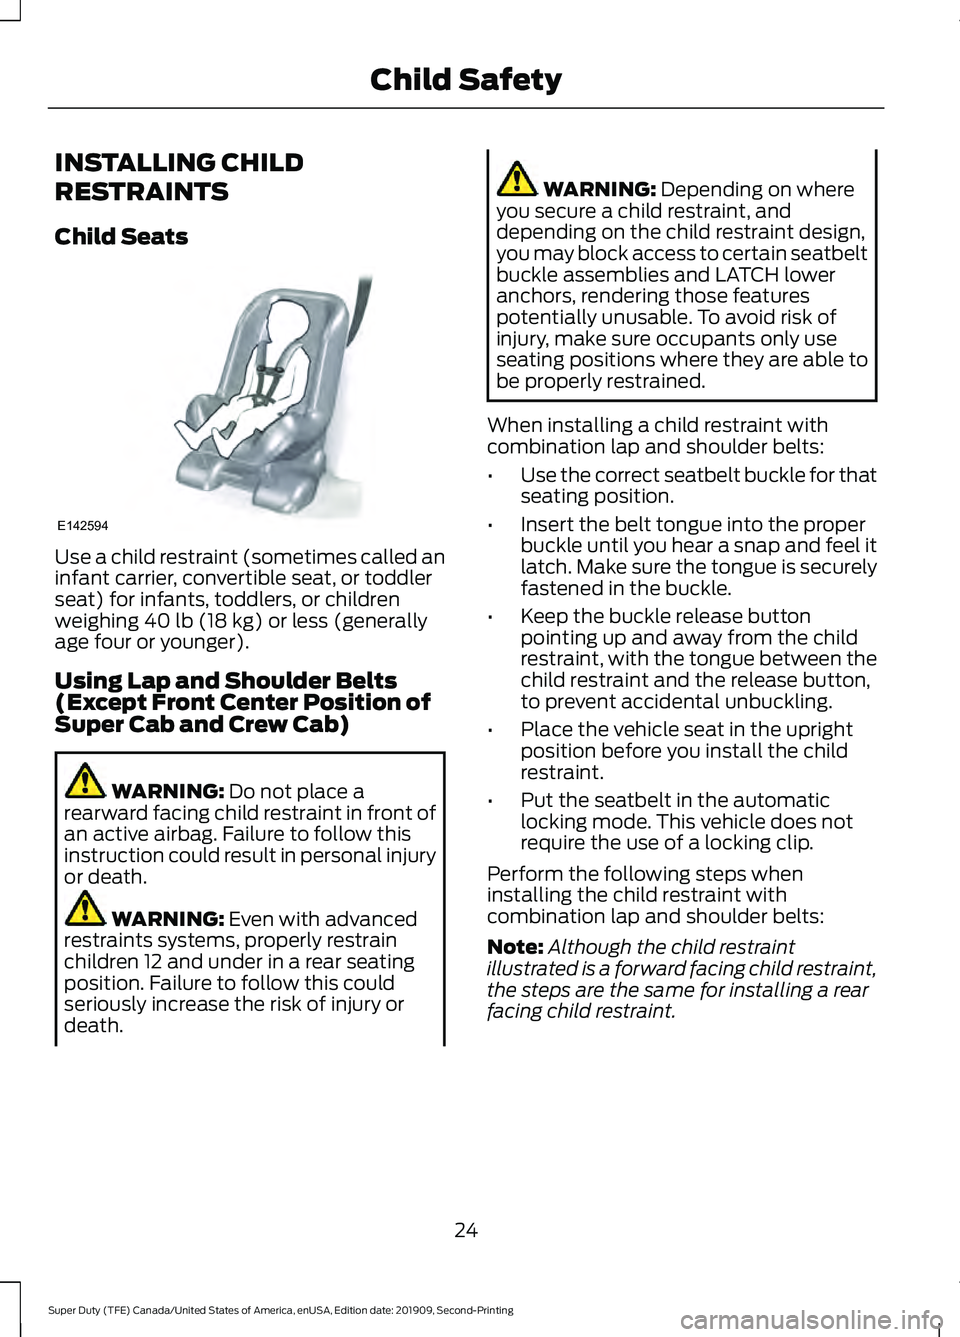 FORD F450 SUPER DUTY 2020  Owners Manual INSTALLING CHILD
RESTRAINTS
Child Seats
Use a child restraint (sometimes called an
infant carrier, convertible seat, or toddler
seat) for infants, toddlers, or children
weighing 40 lb (18 kg) or less 